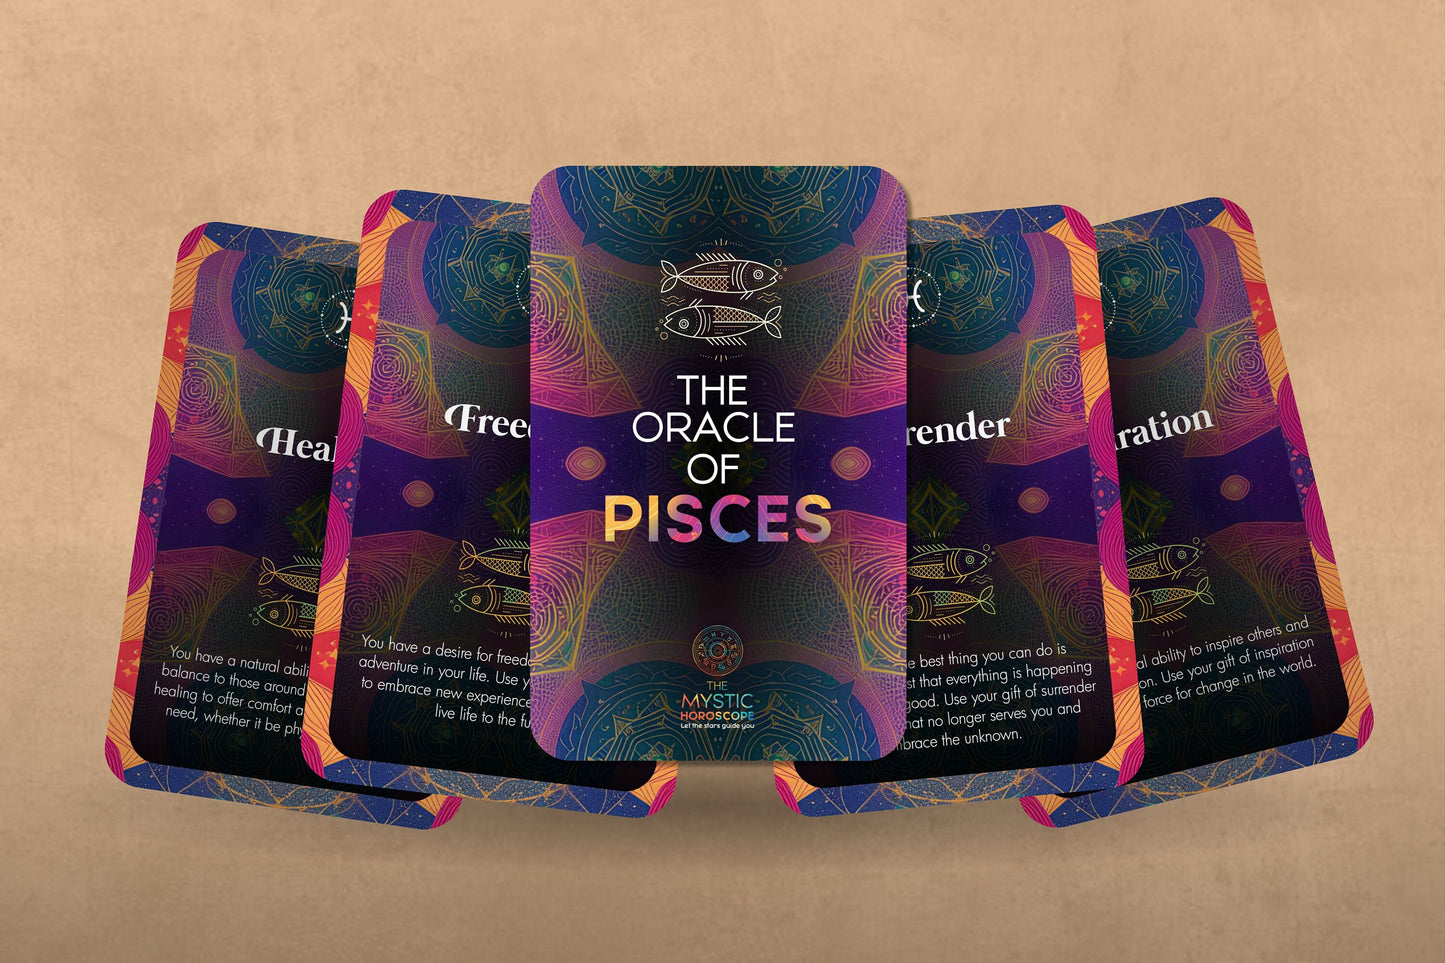 The Oracle of Pisces - The Mystic Horoscope